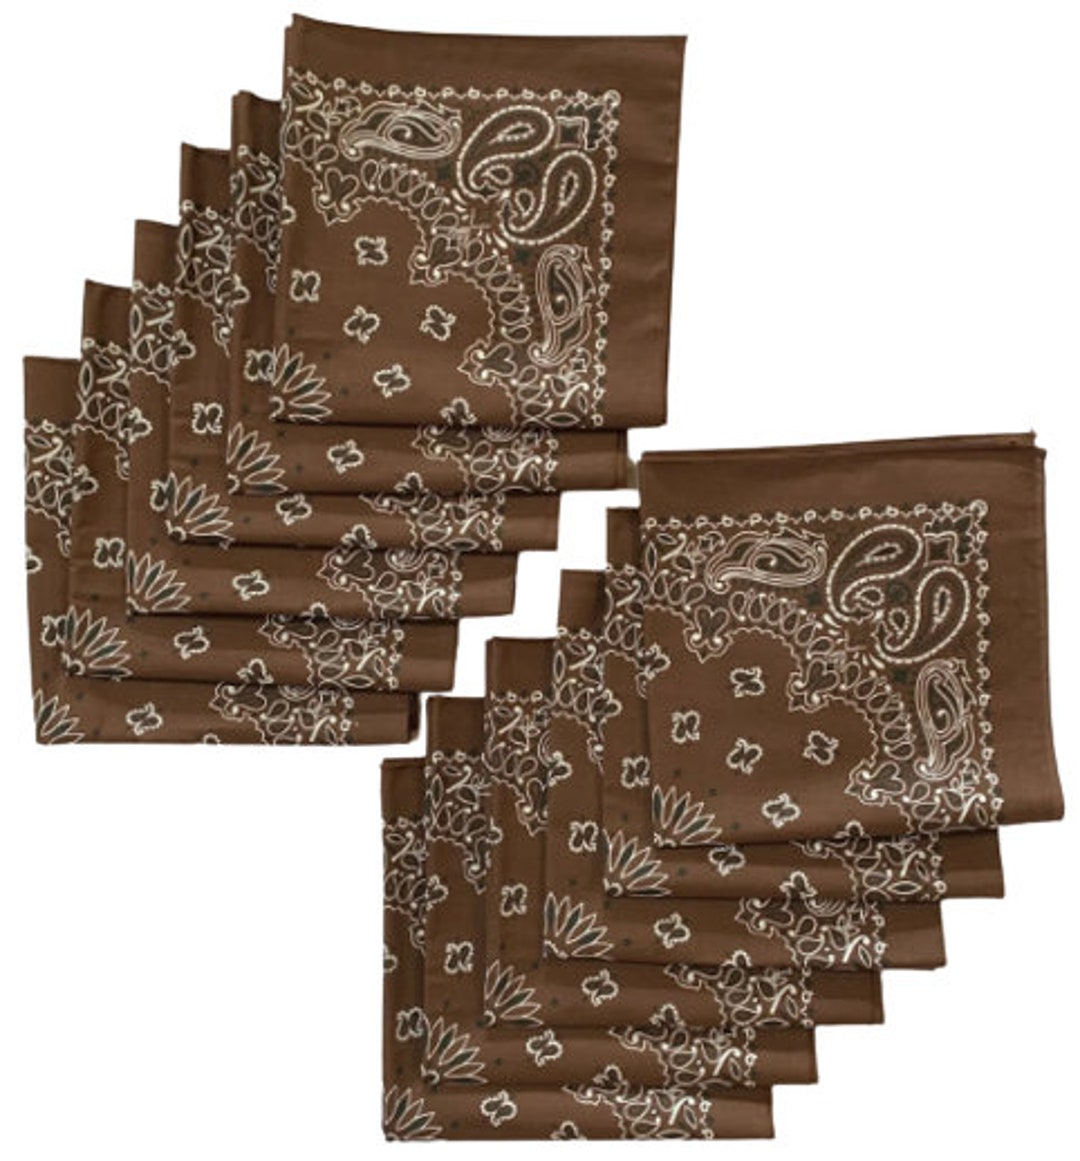 Made in the USA Brown Paisley Bandanas 12 Pack 100% Cotton picture